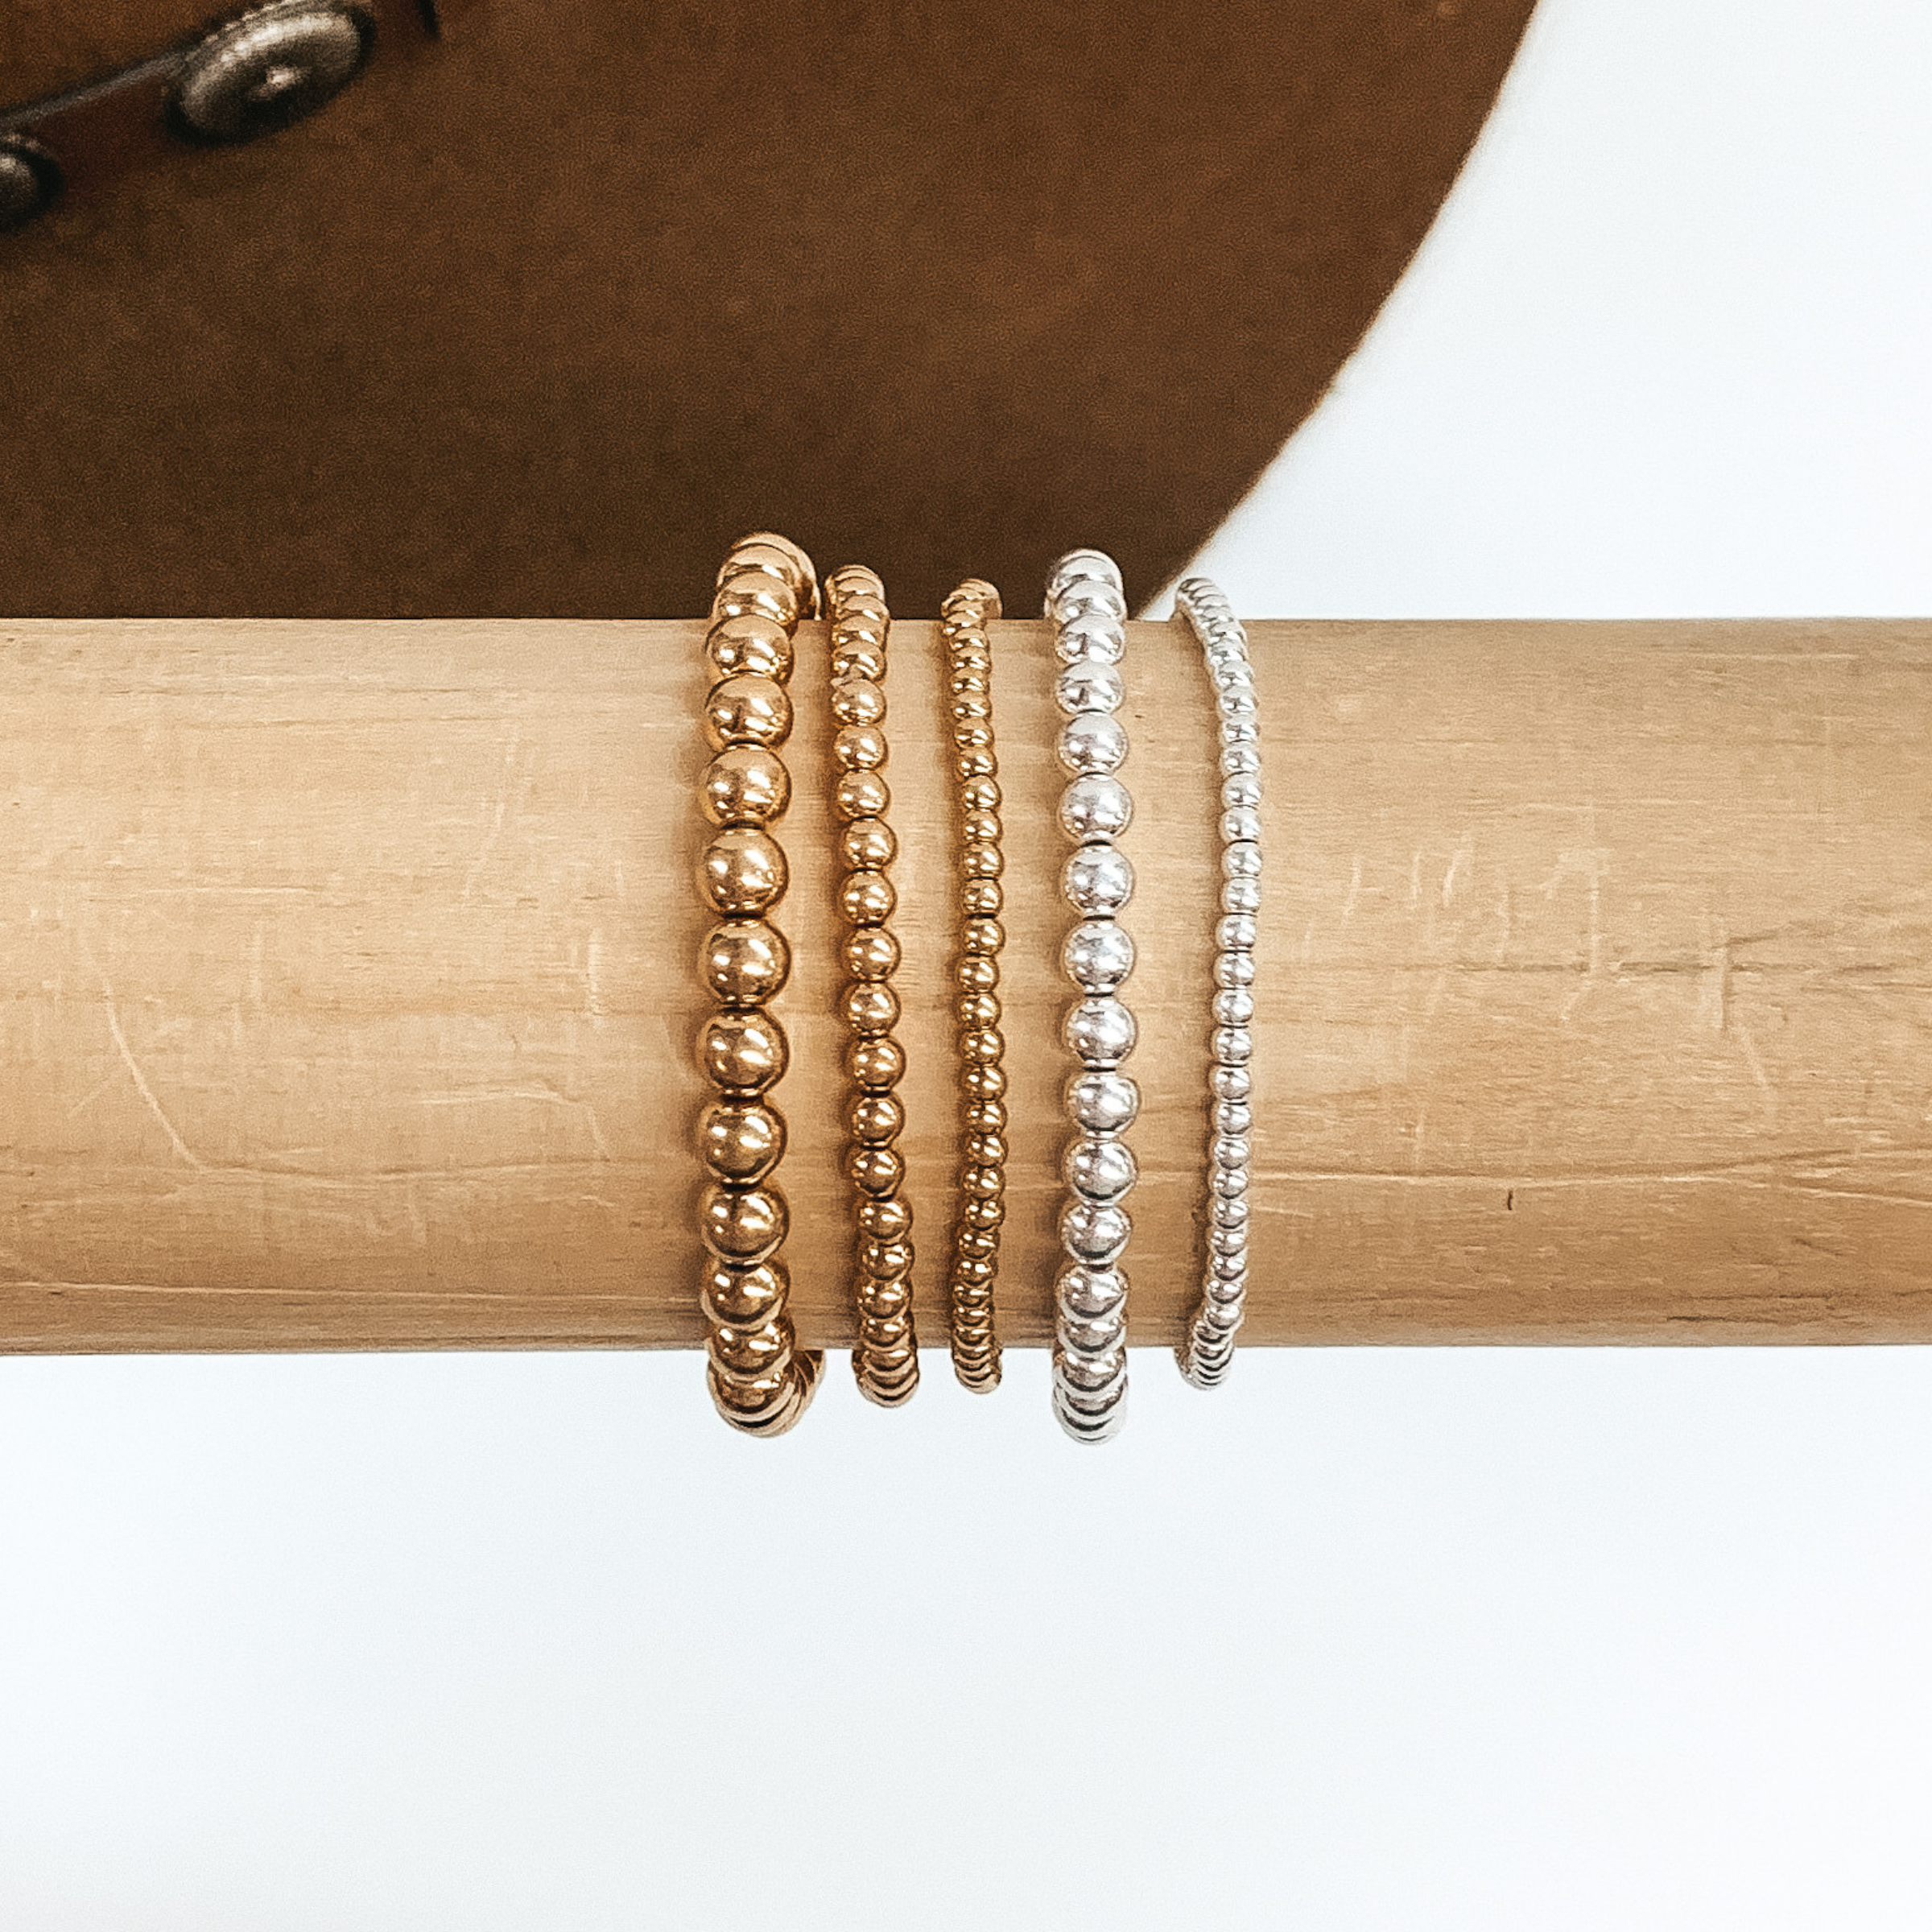 Set of five matte gold and matte silver beaded bracelets in different sizes. These bracelets are pictured on a wooden bracelet holder on a white and brown background.